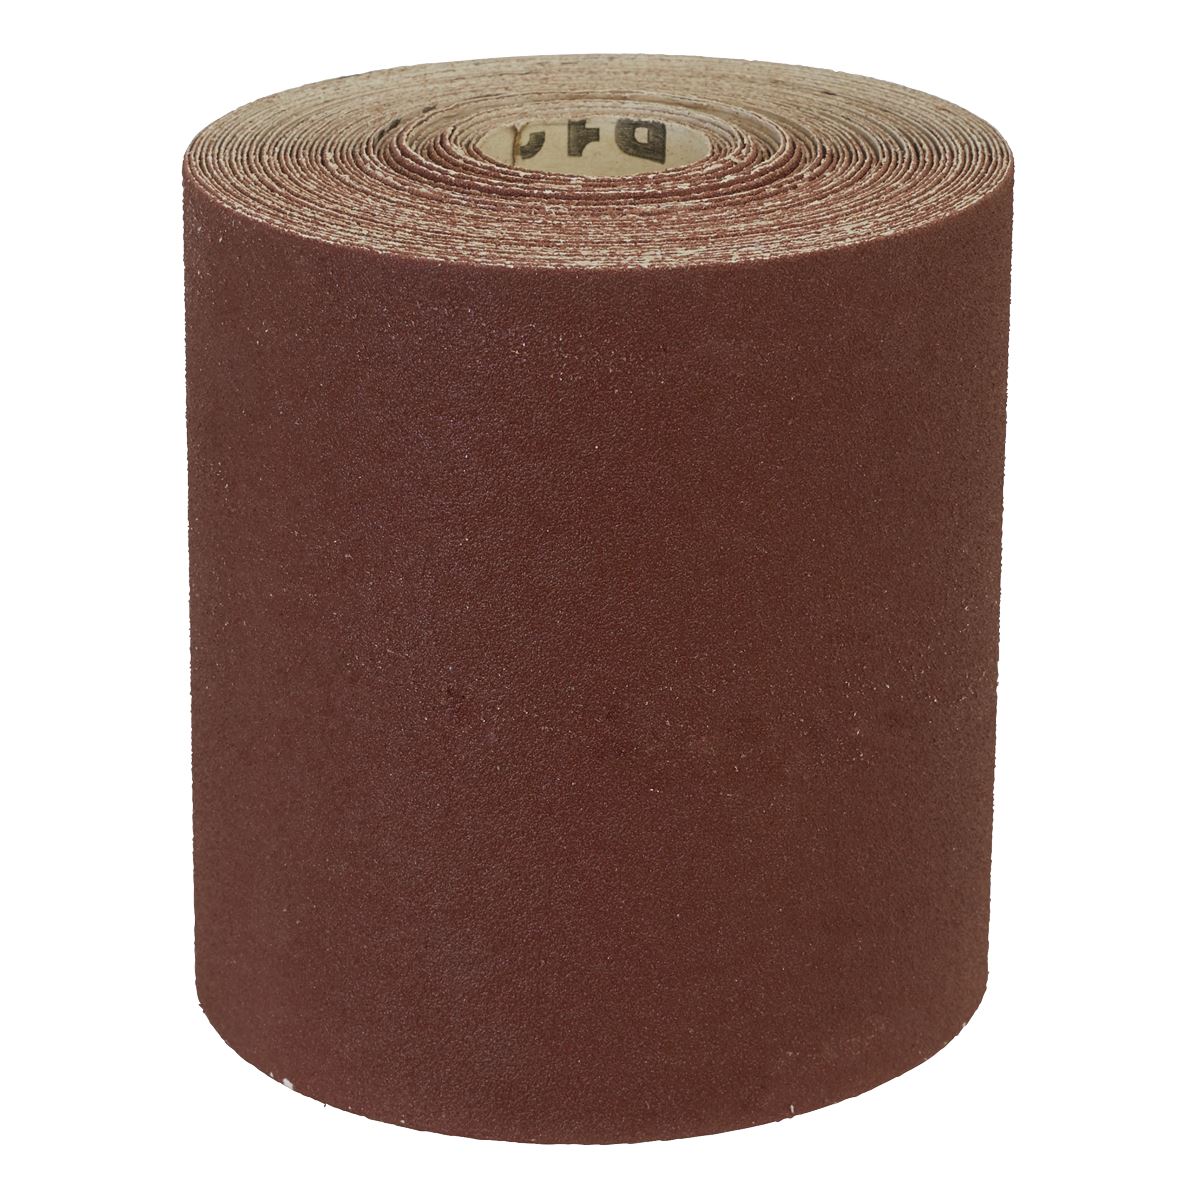 Worksafe by Sealey Production Sanding Roll 115mm x 10m - Ultra-Fine 240Grit